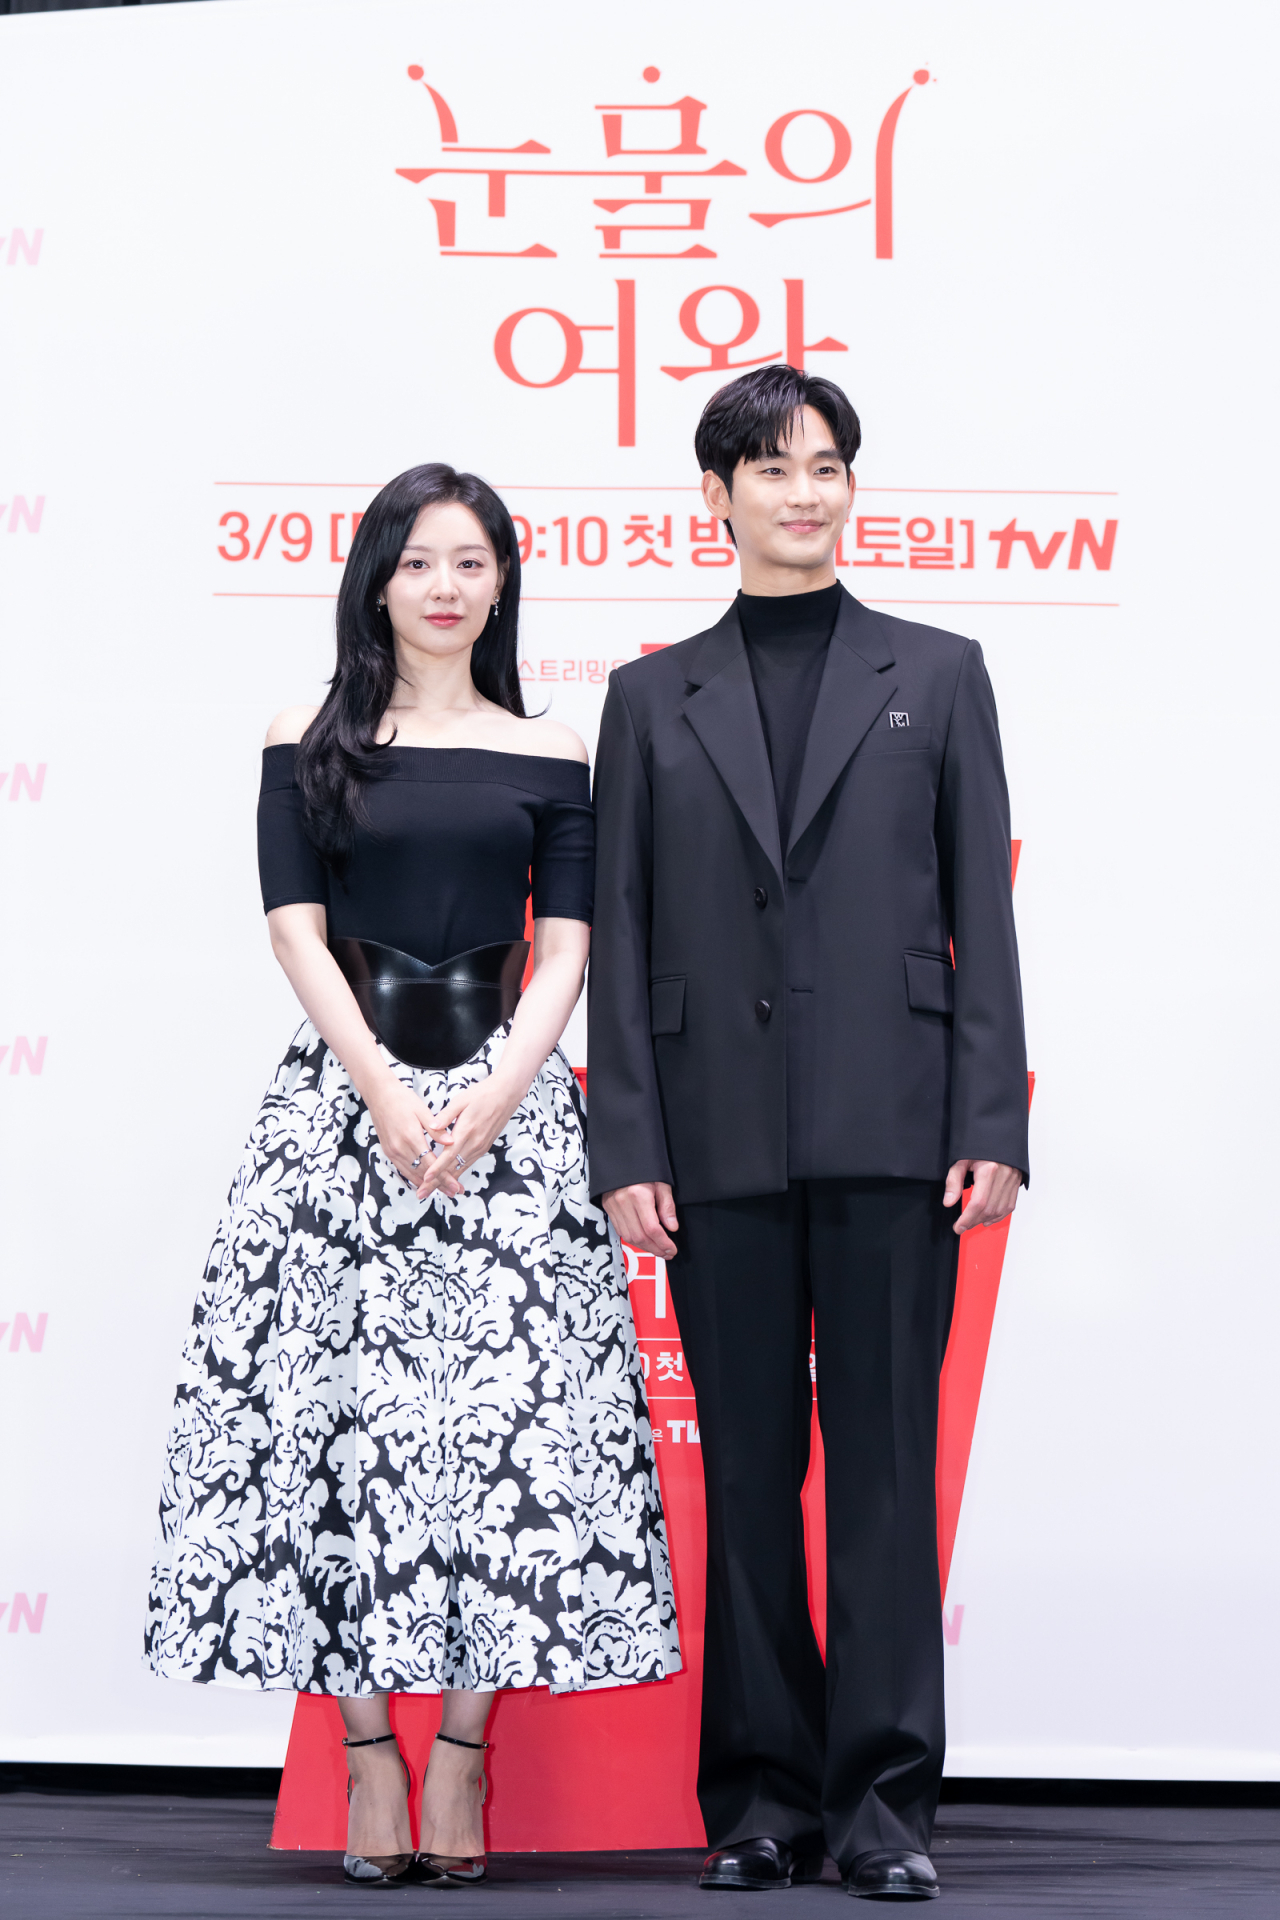 Kim Ji-won (left) and Kim Su-hyun pose for a photo during a press conference held in Guro-gu, Seoul, Thursday. (tvN)